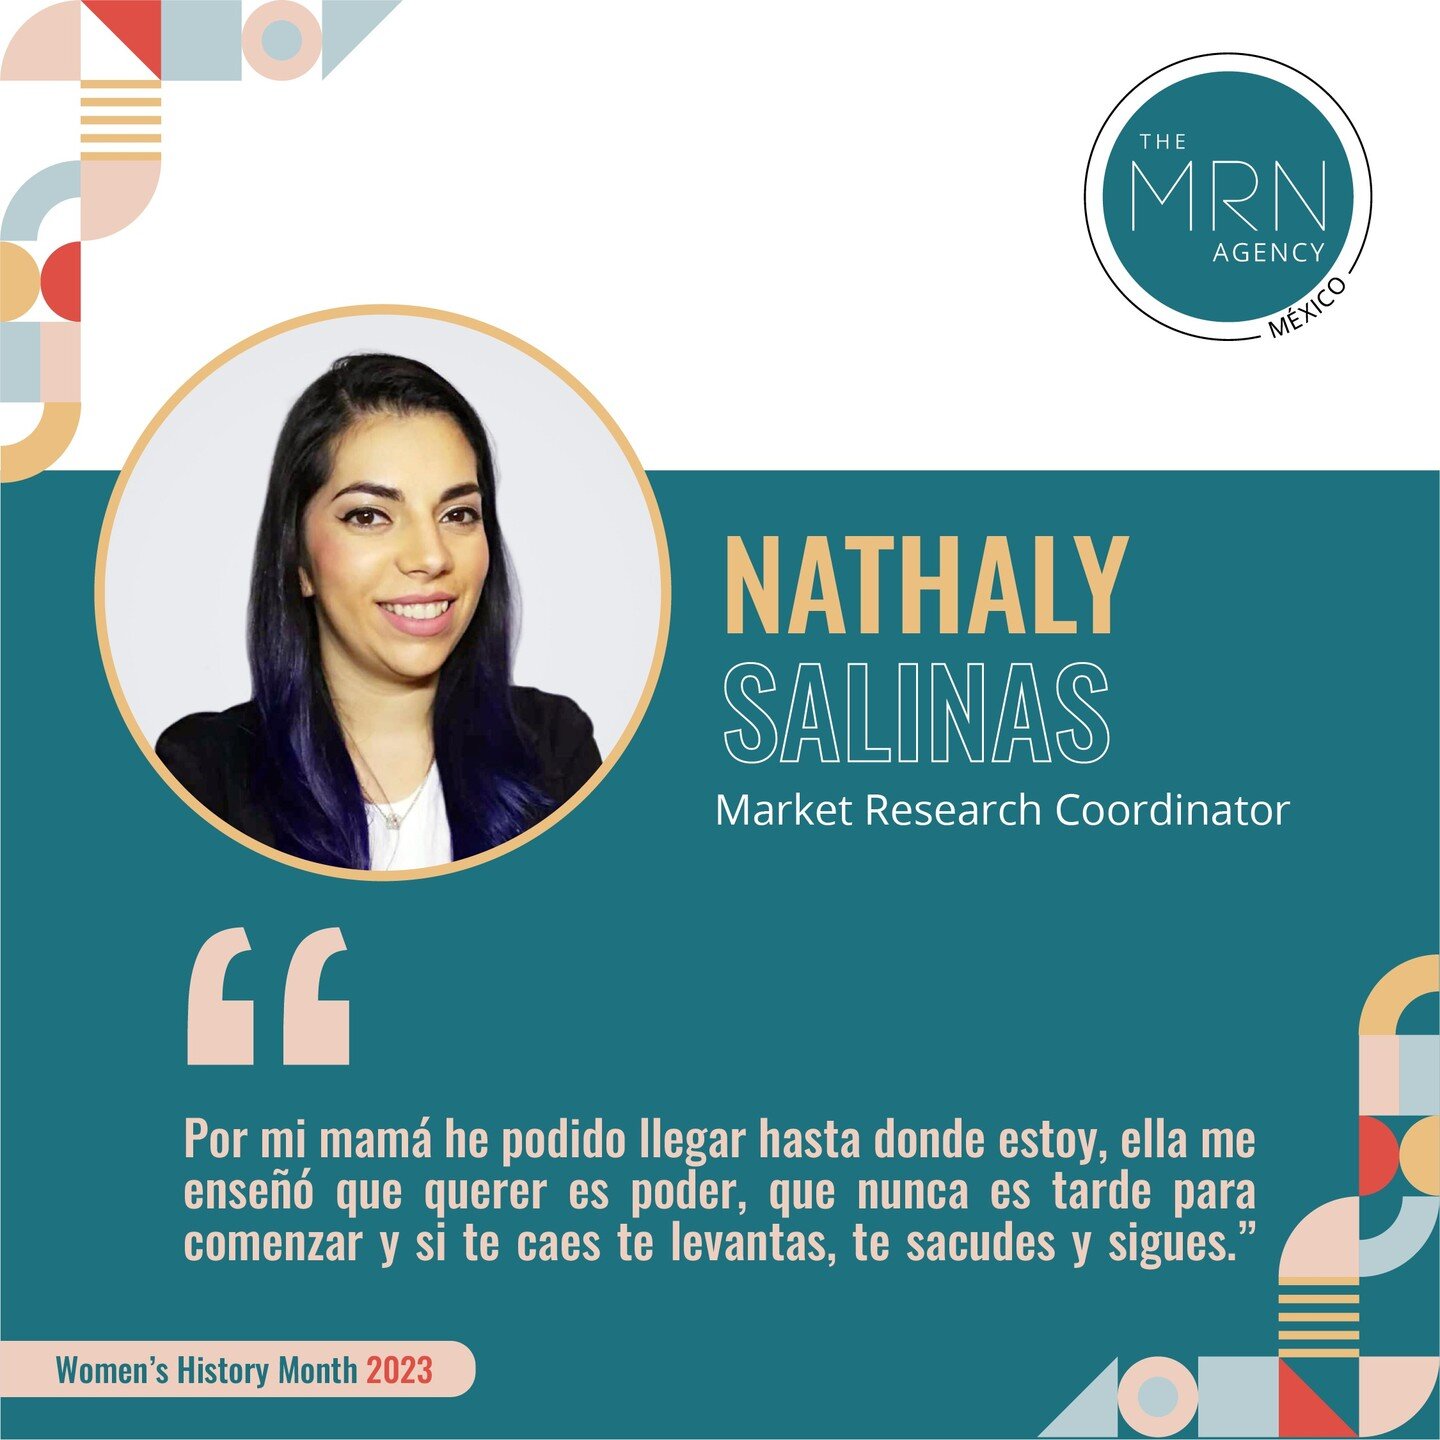 MRN is celebrating Women&rsquo;s History Month by highlighting the women who&rsquo;ve inspired our team!

Nathaly Salinas, our Market Research Coordinator, is inspired by&nbsp;her mom.

&ldquo;Por mi mam&aacute; he podido llegar hasta donde estoy, el